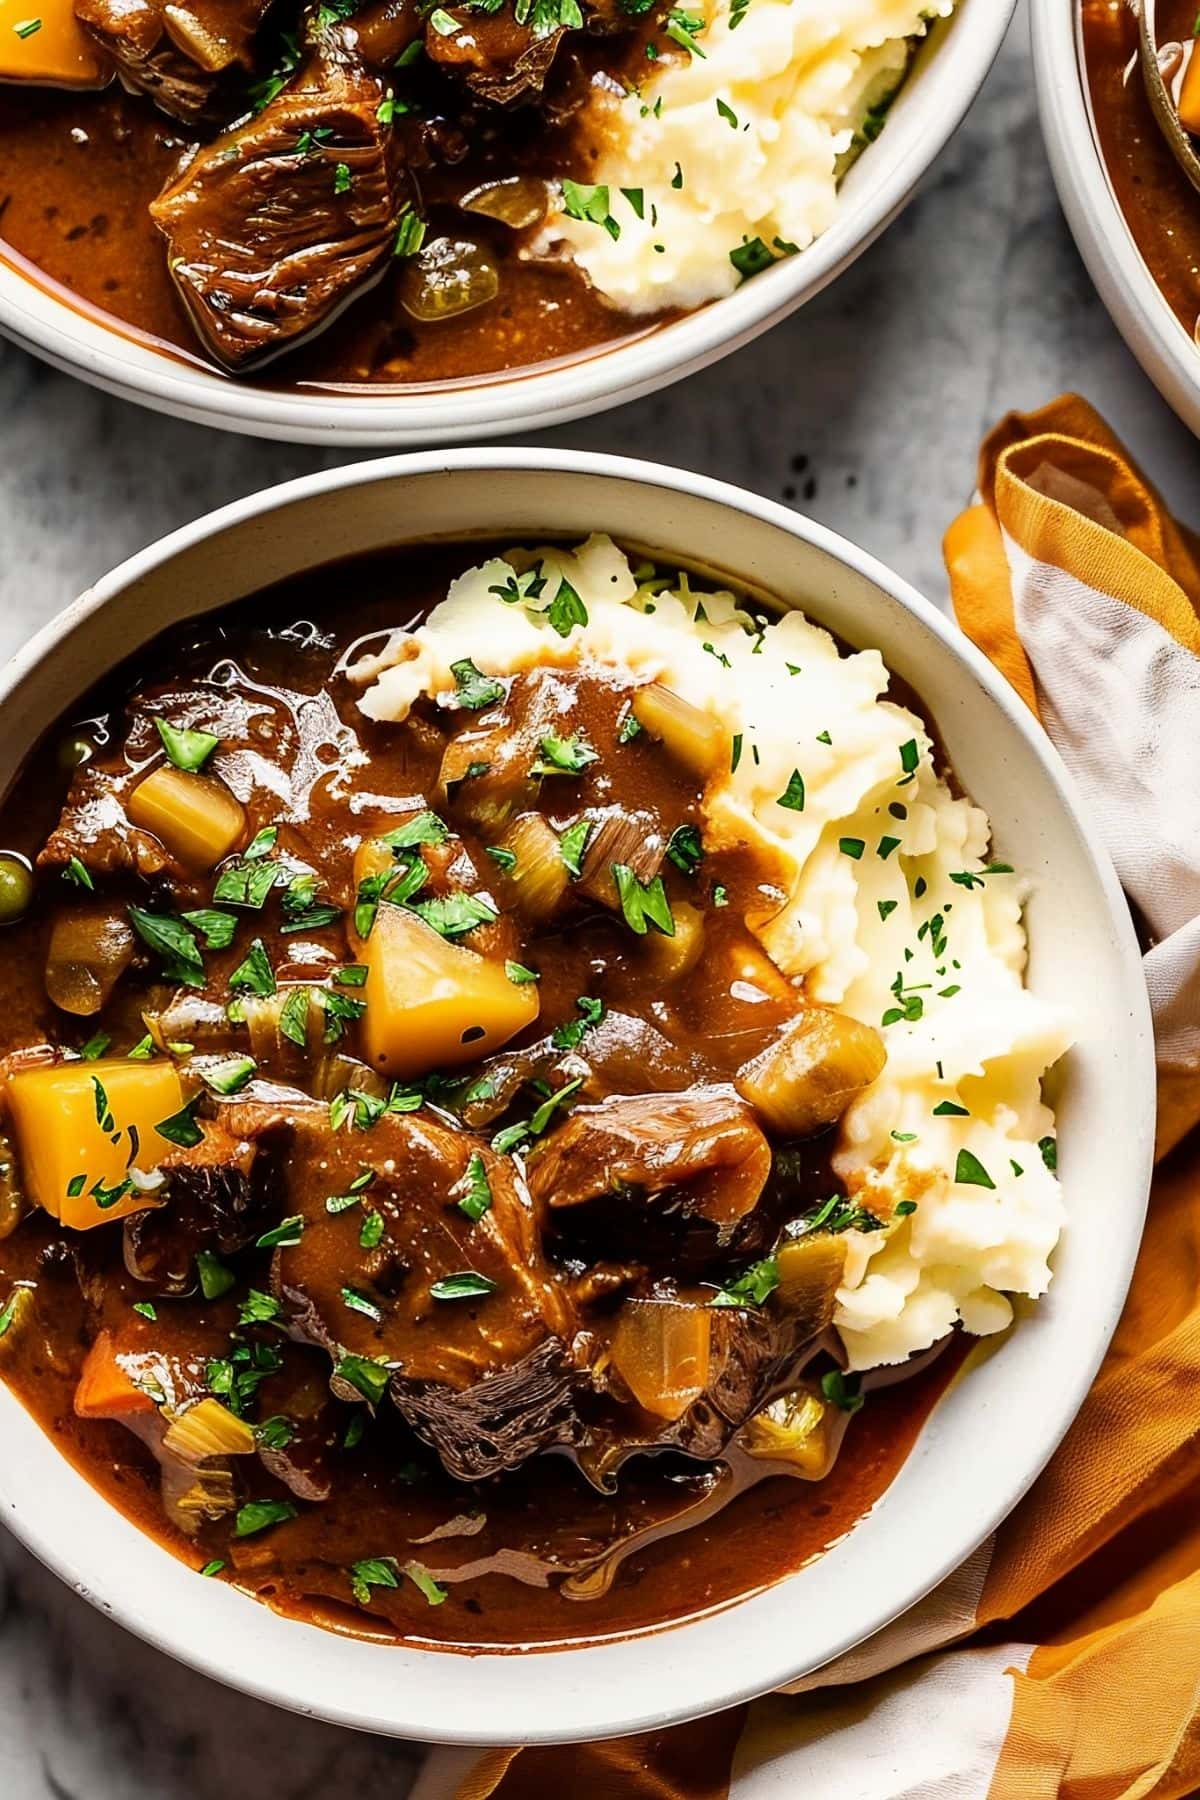 Three Bowls of Delicious Guinness Beef Stew Over Mashed Potatoes with a Yellow Kitchen Towels